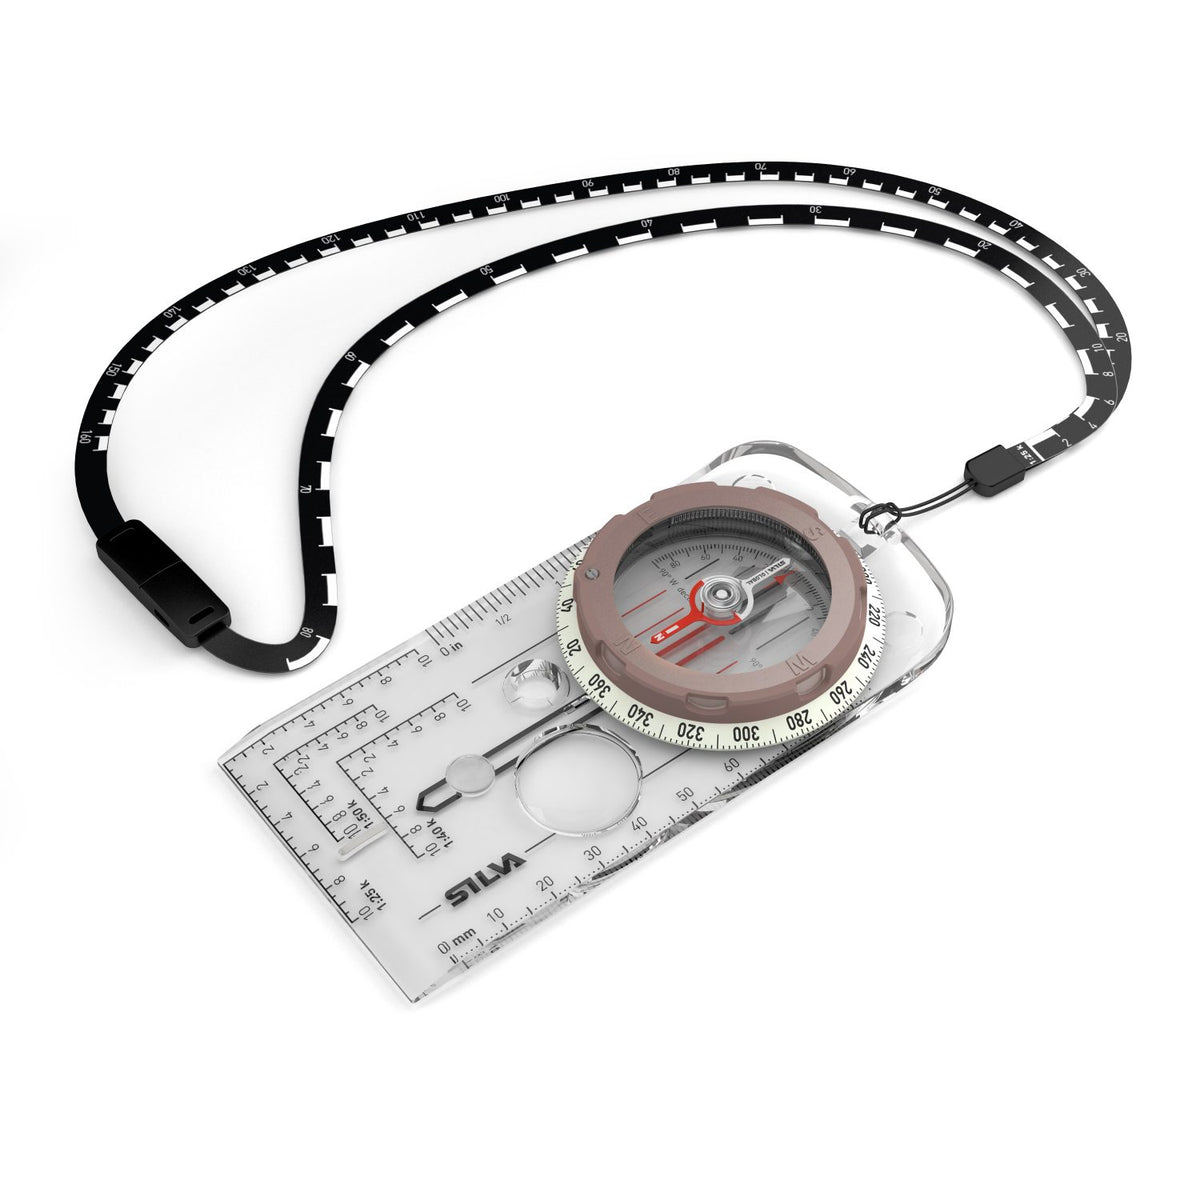 Silva Expedition 360 Global compass shown with lanyard